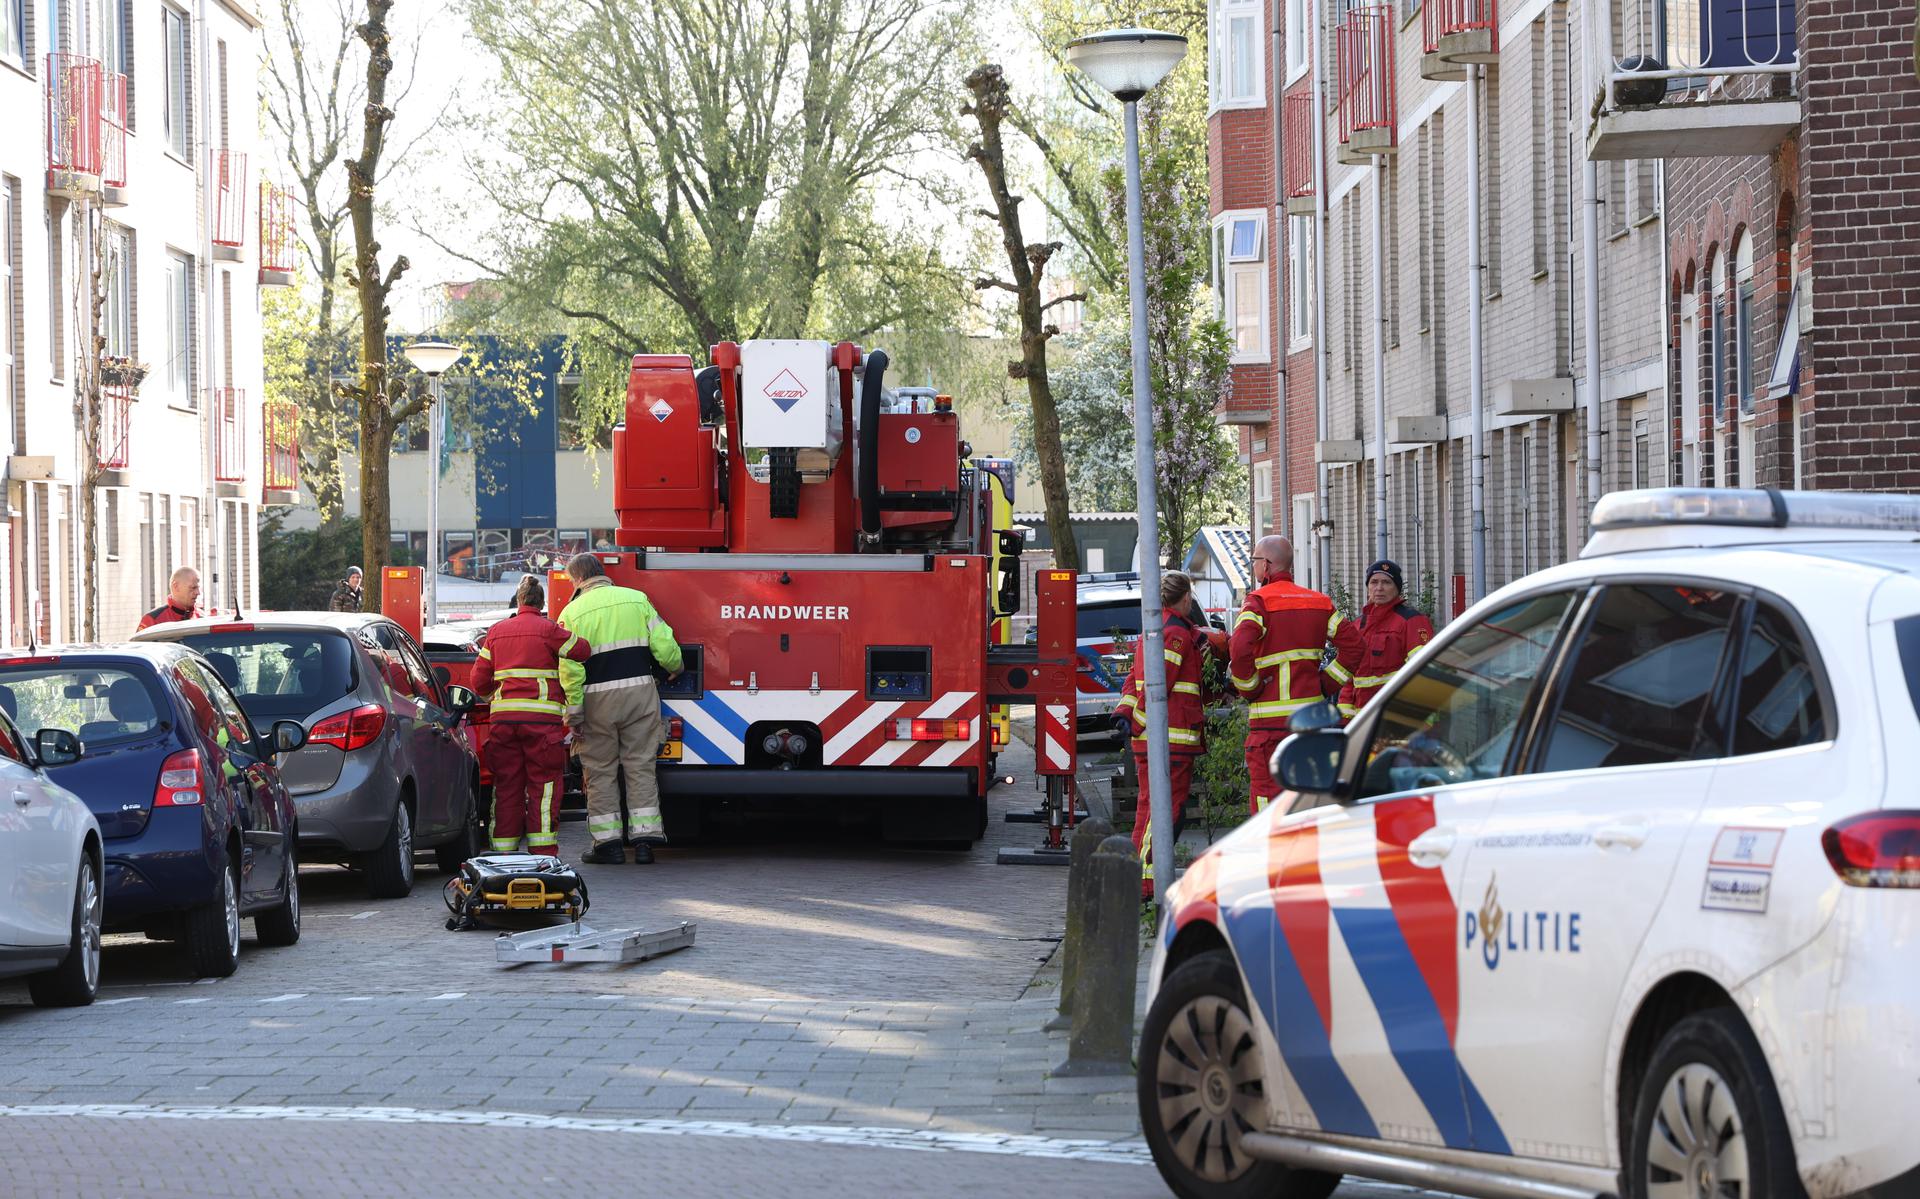 46-Year-Old Woman Arrested After Fatal Stabbing in Groningen: Man Dies from Injuries